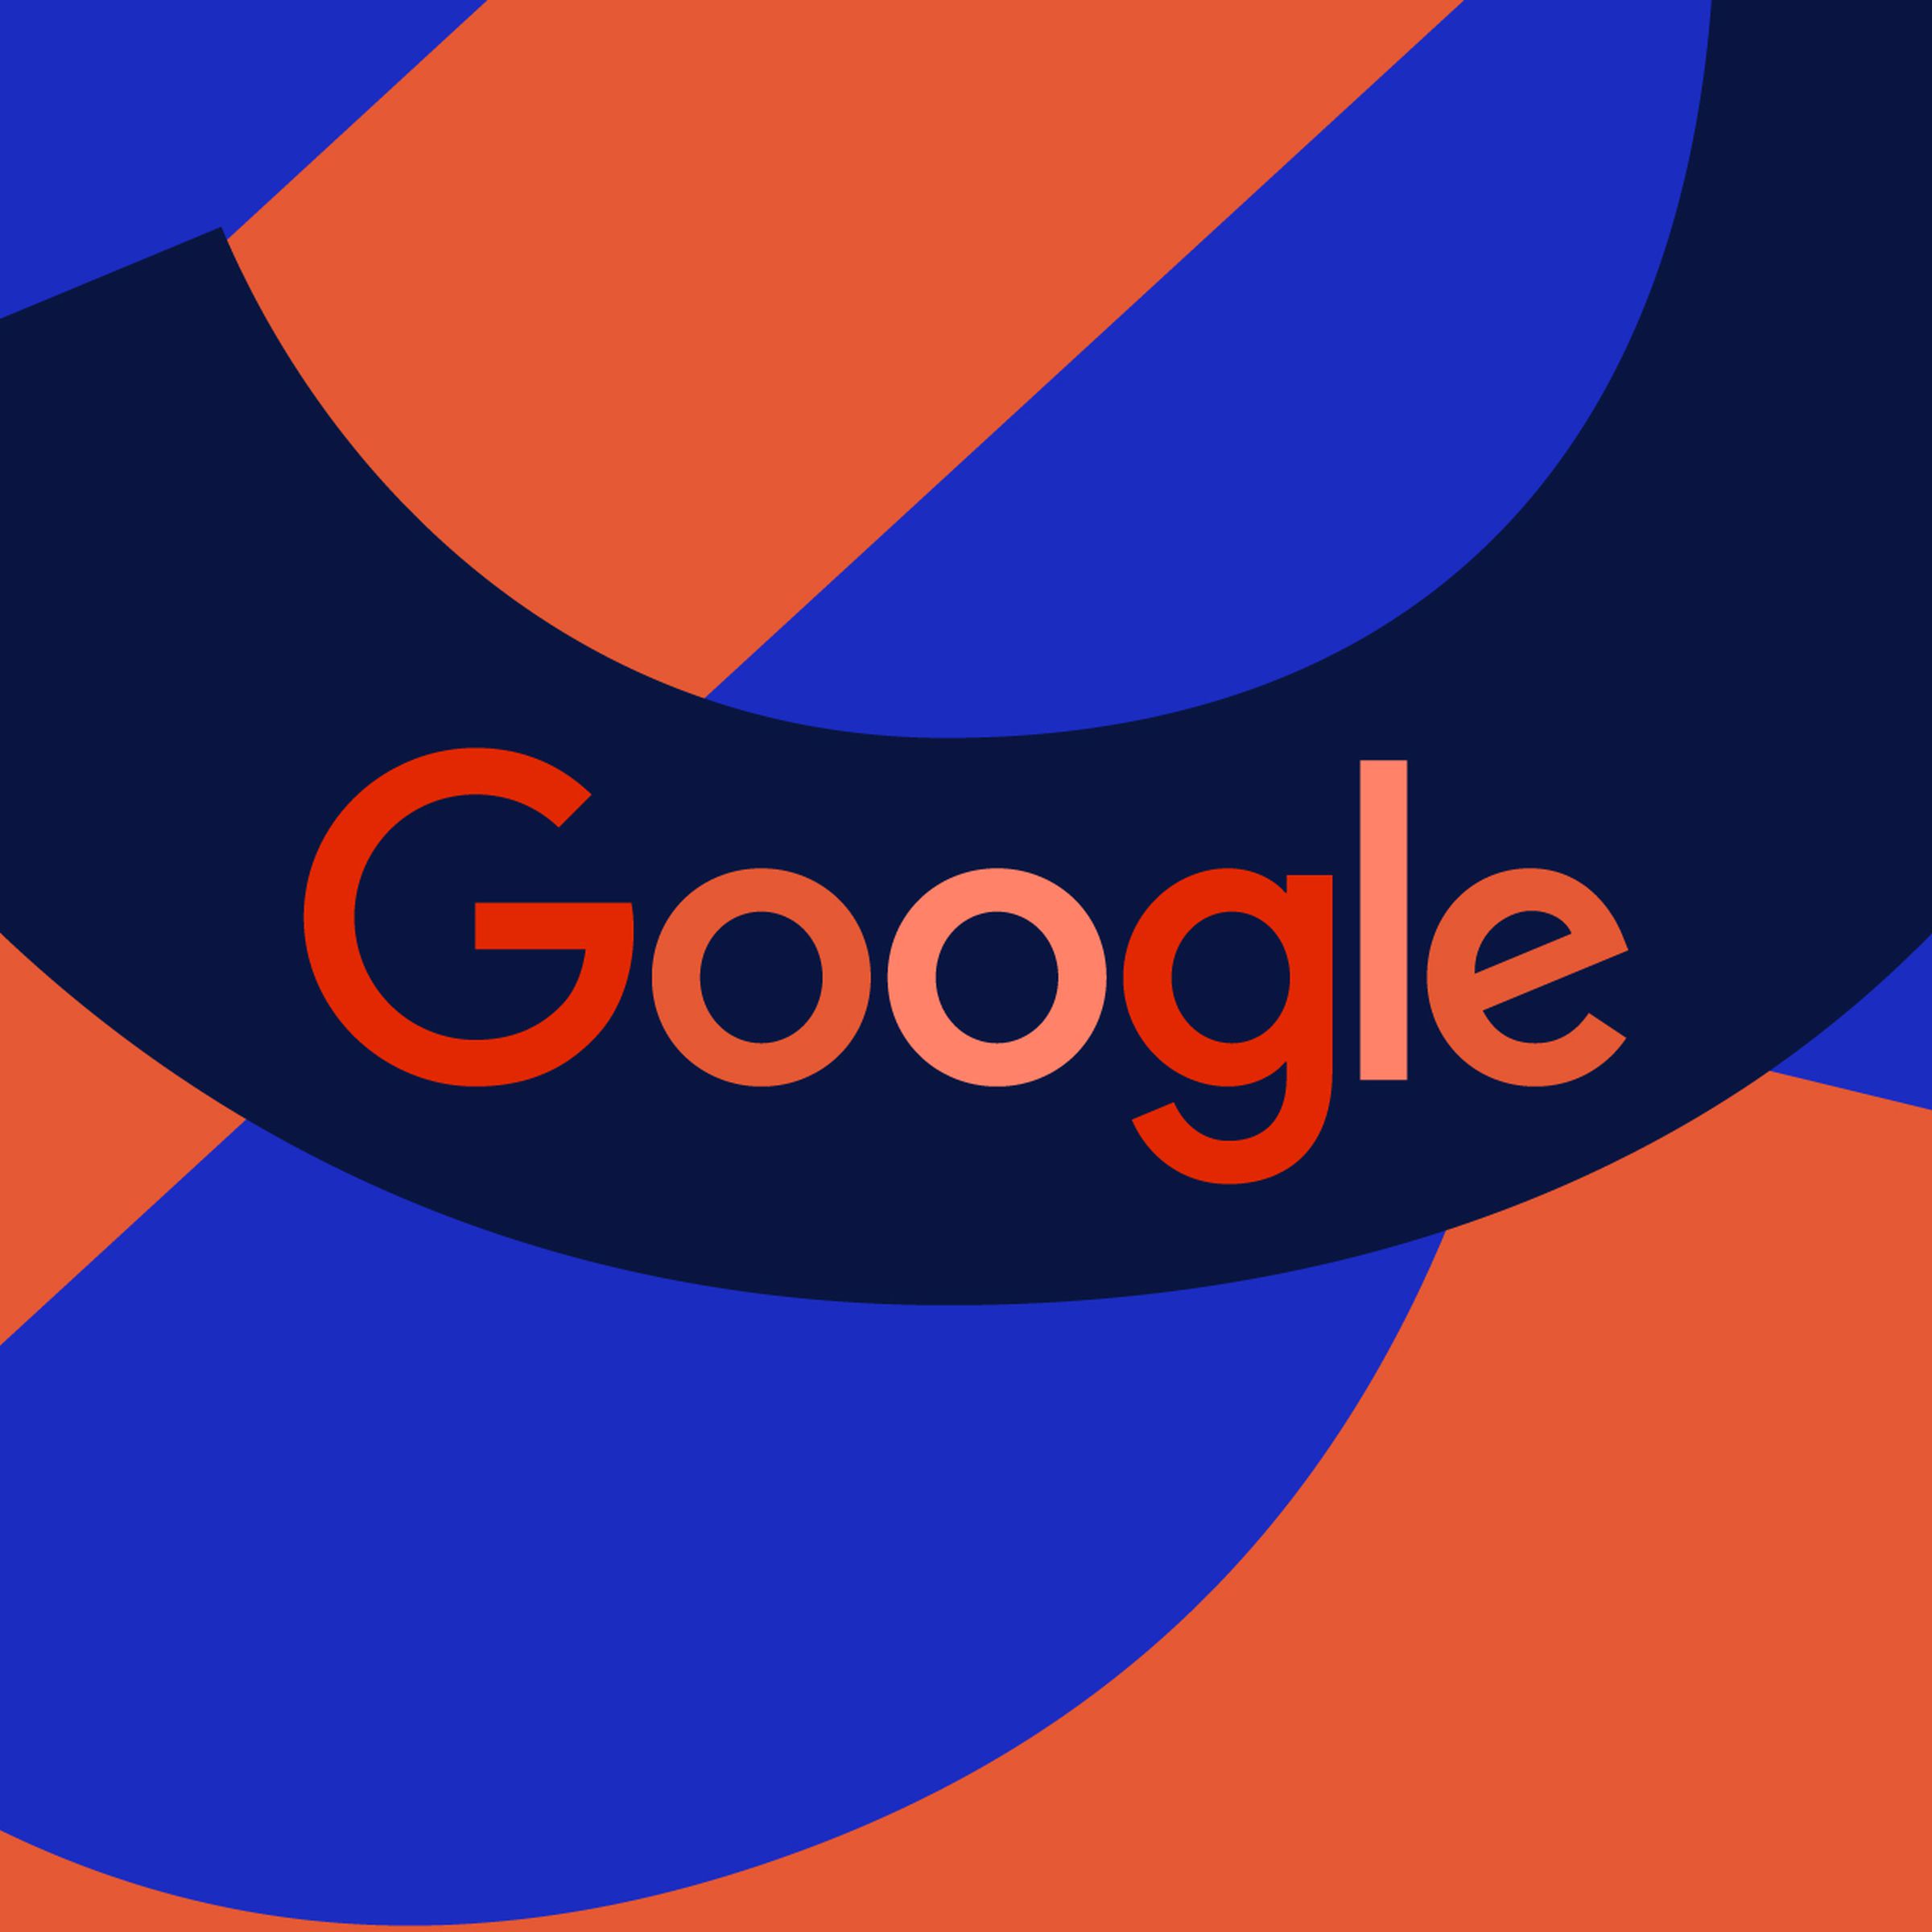 Illustration of Google’s wordmark, written in red and pink on a dark blue background.